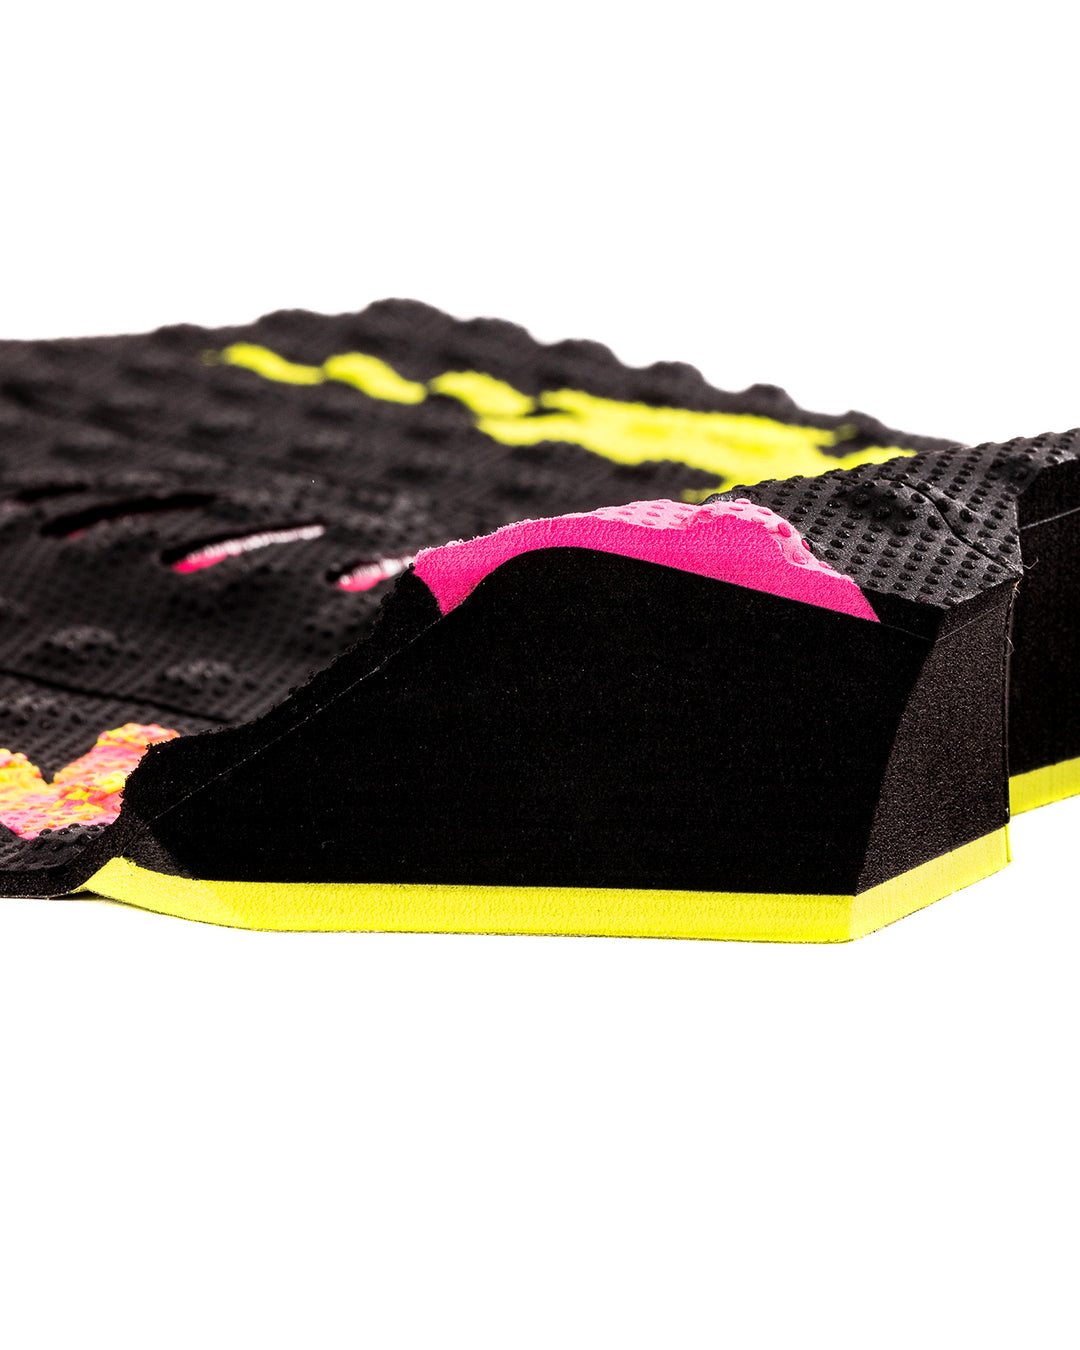 Mick Eugene Fanning Lite Small Wave Traction